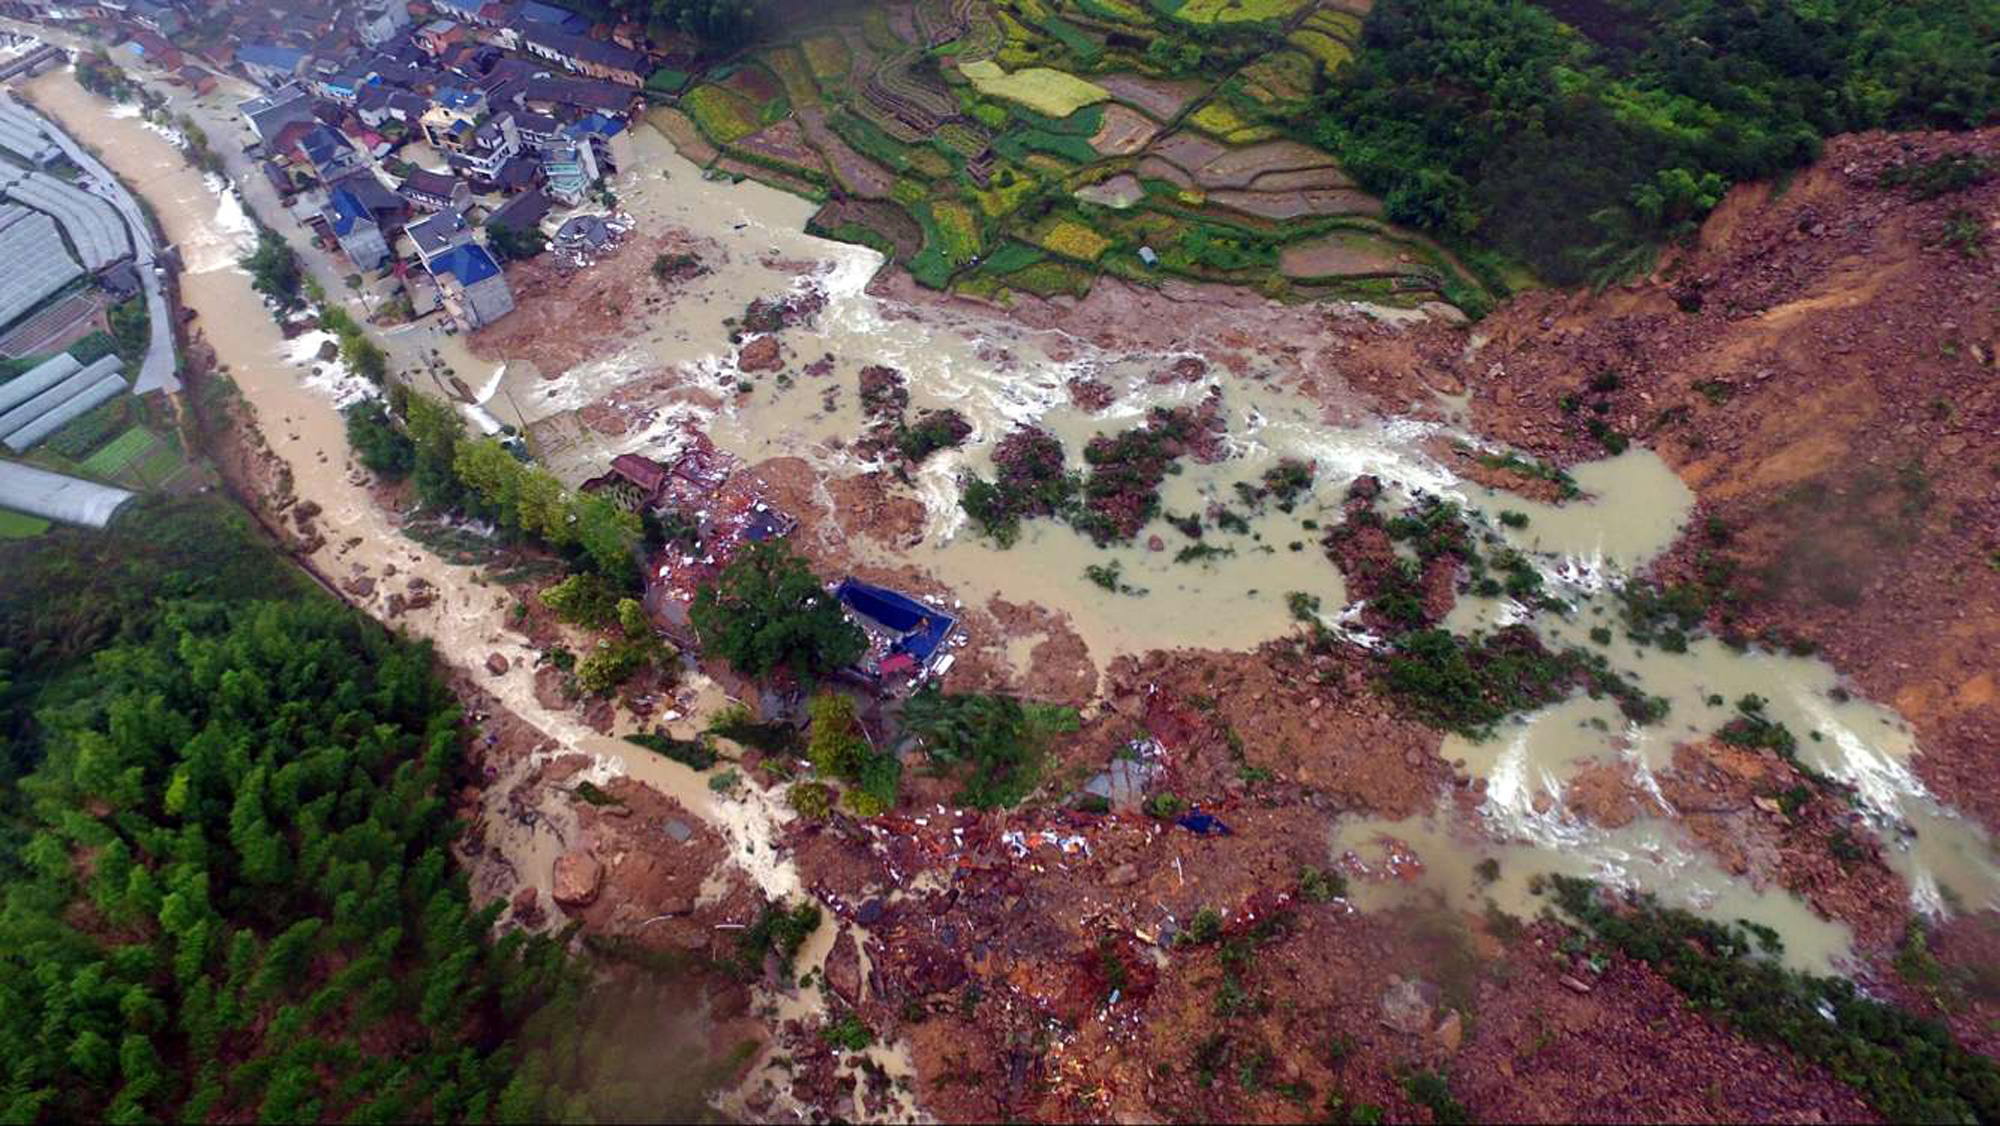 This aerial photo taken on September 29, 2016 shows Chinese rescuers searching for survivors at a landslide area in the village of Sucun in Suichang county, east China's Zhejiang province. A landslide which hit a village in eastern China on September 28 buried dozens of houses and left 27 people missing, state media reported. / AFP PHOTO / STR / China OUT